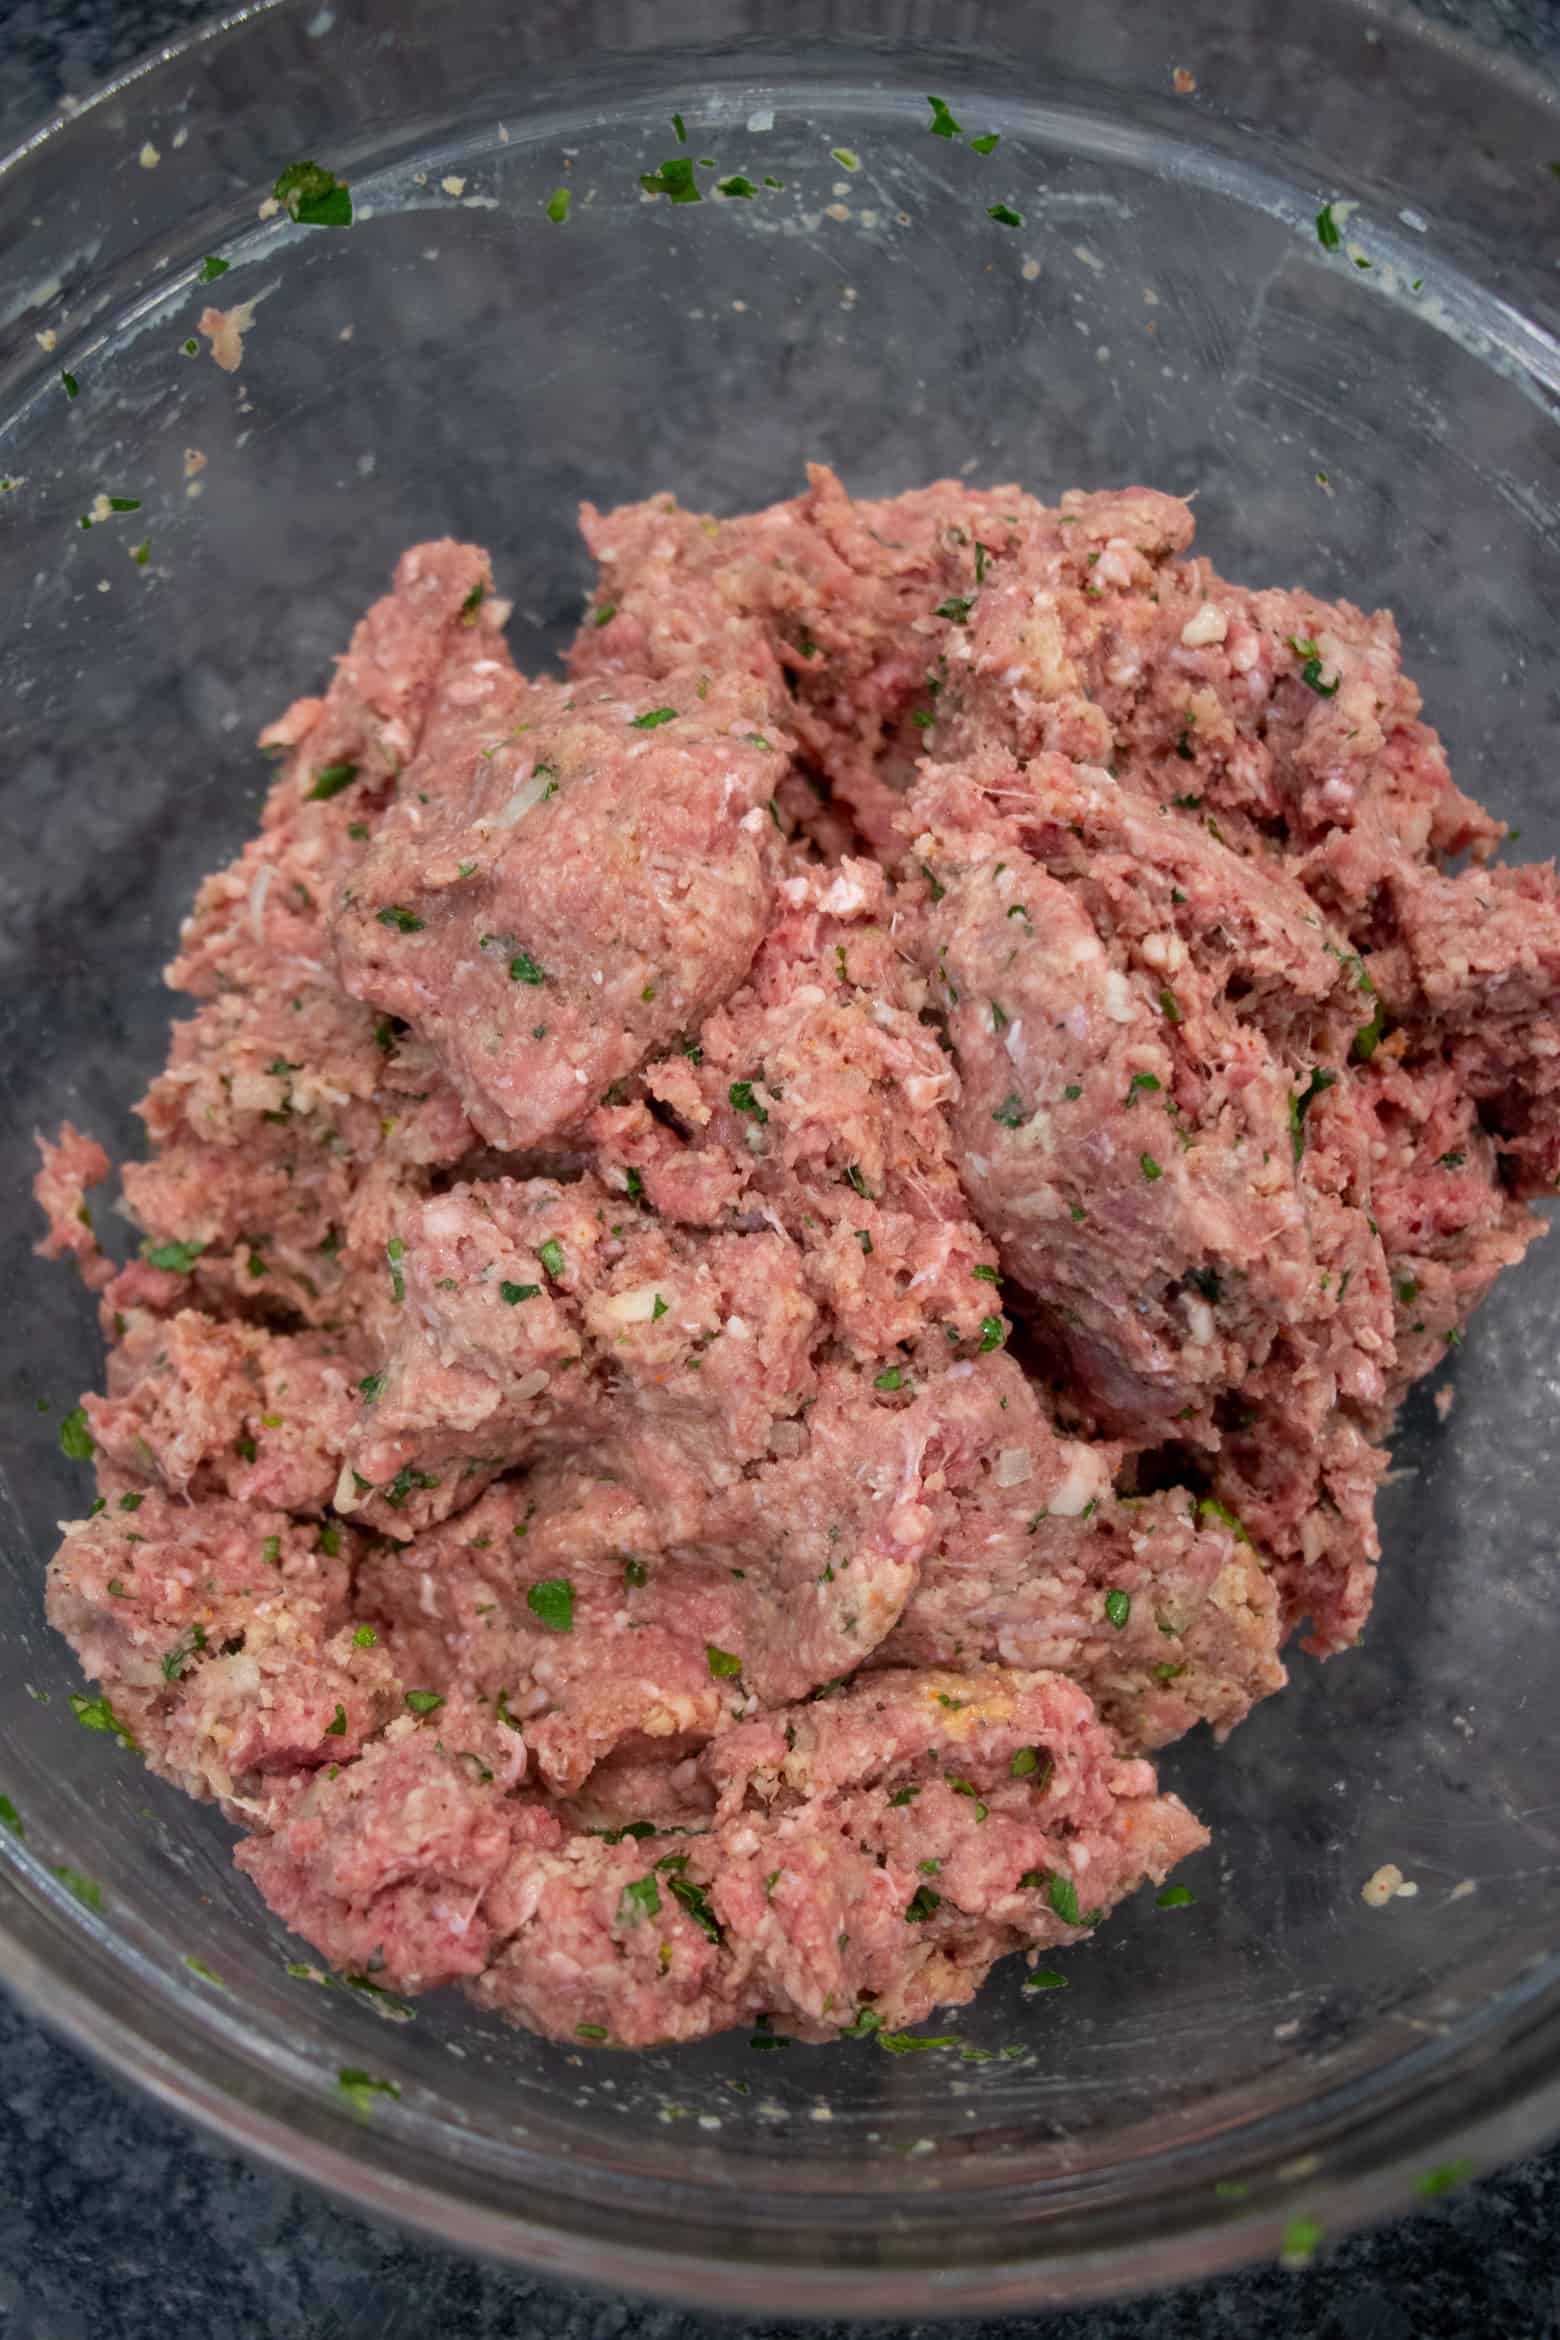 bbq meatballs mixture fully combined.